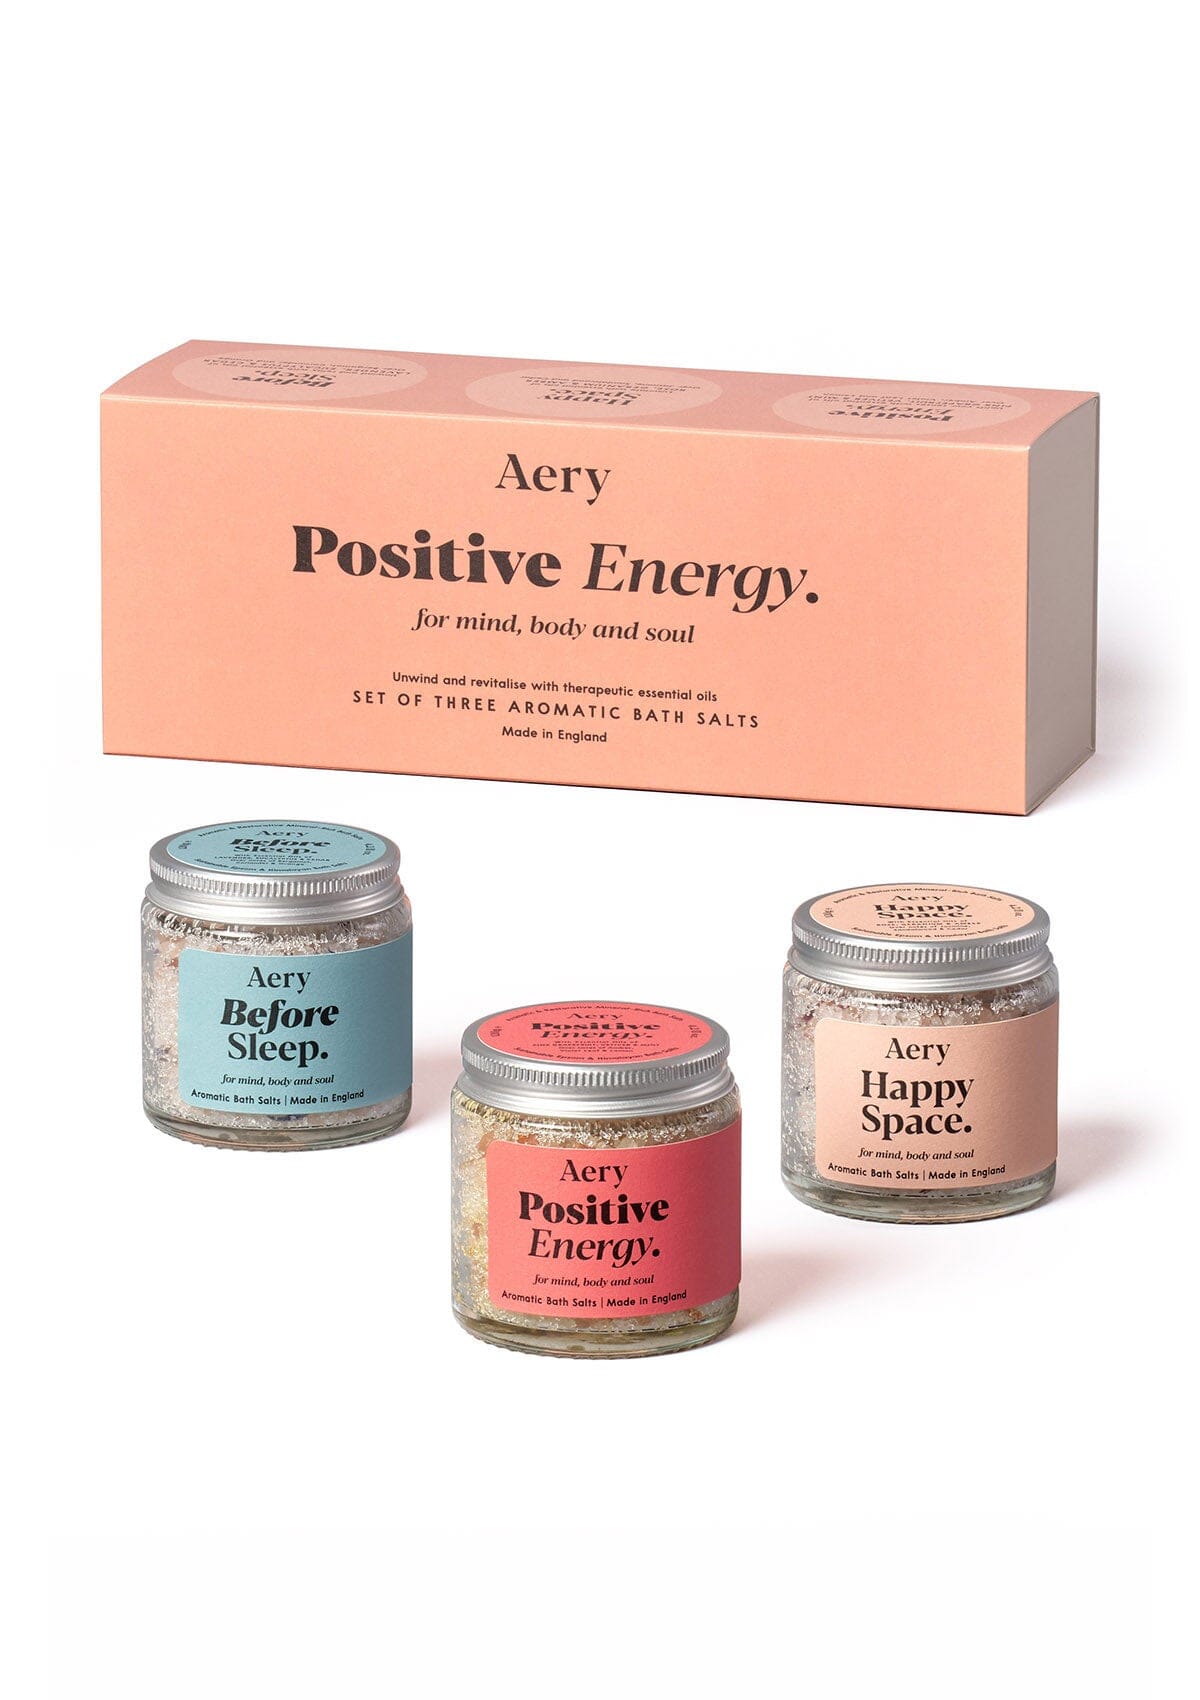 Orange Positive Energy Mini Baths Salts set of three by Aery displayed next to product packaging on white background